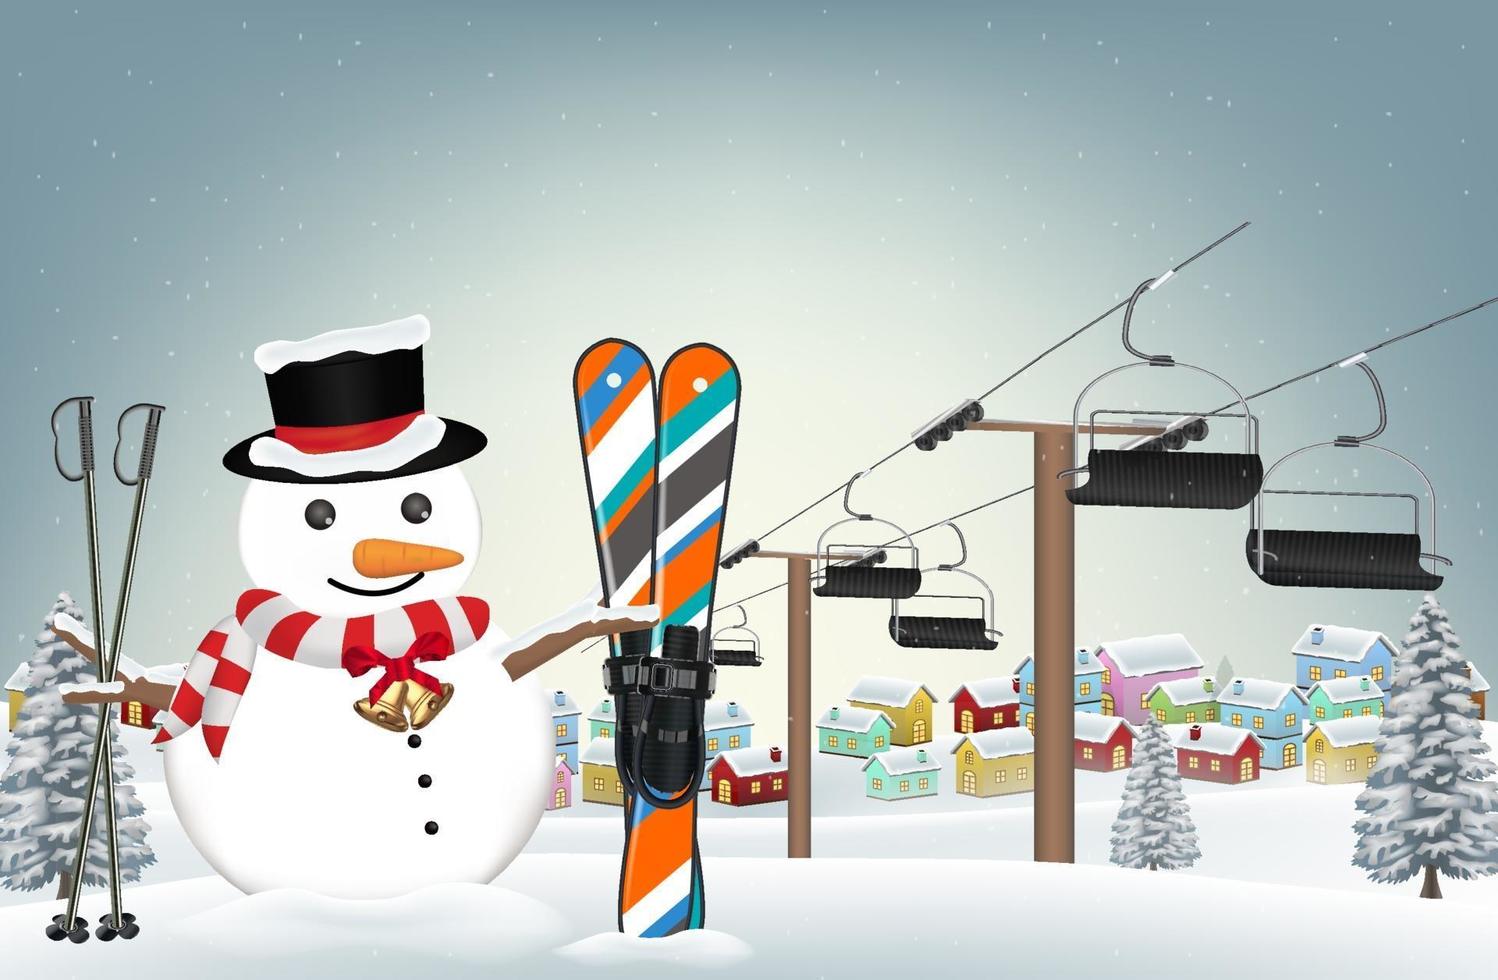 let's go skiing with snowman with  ski equipment vector